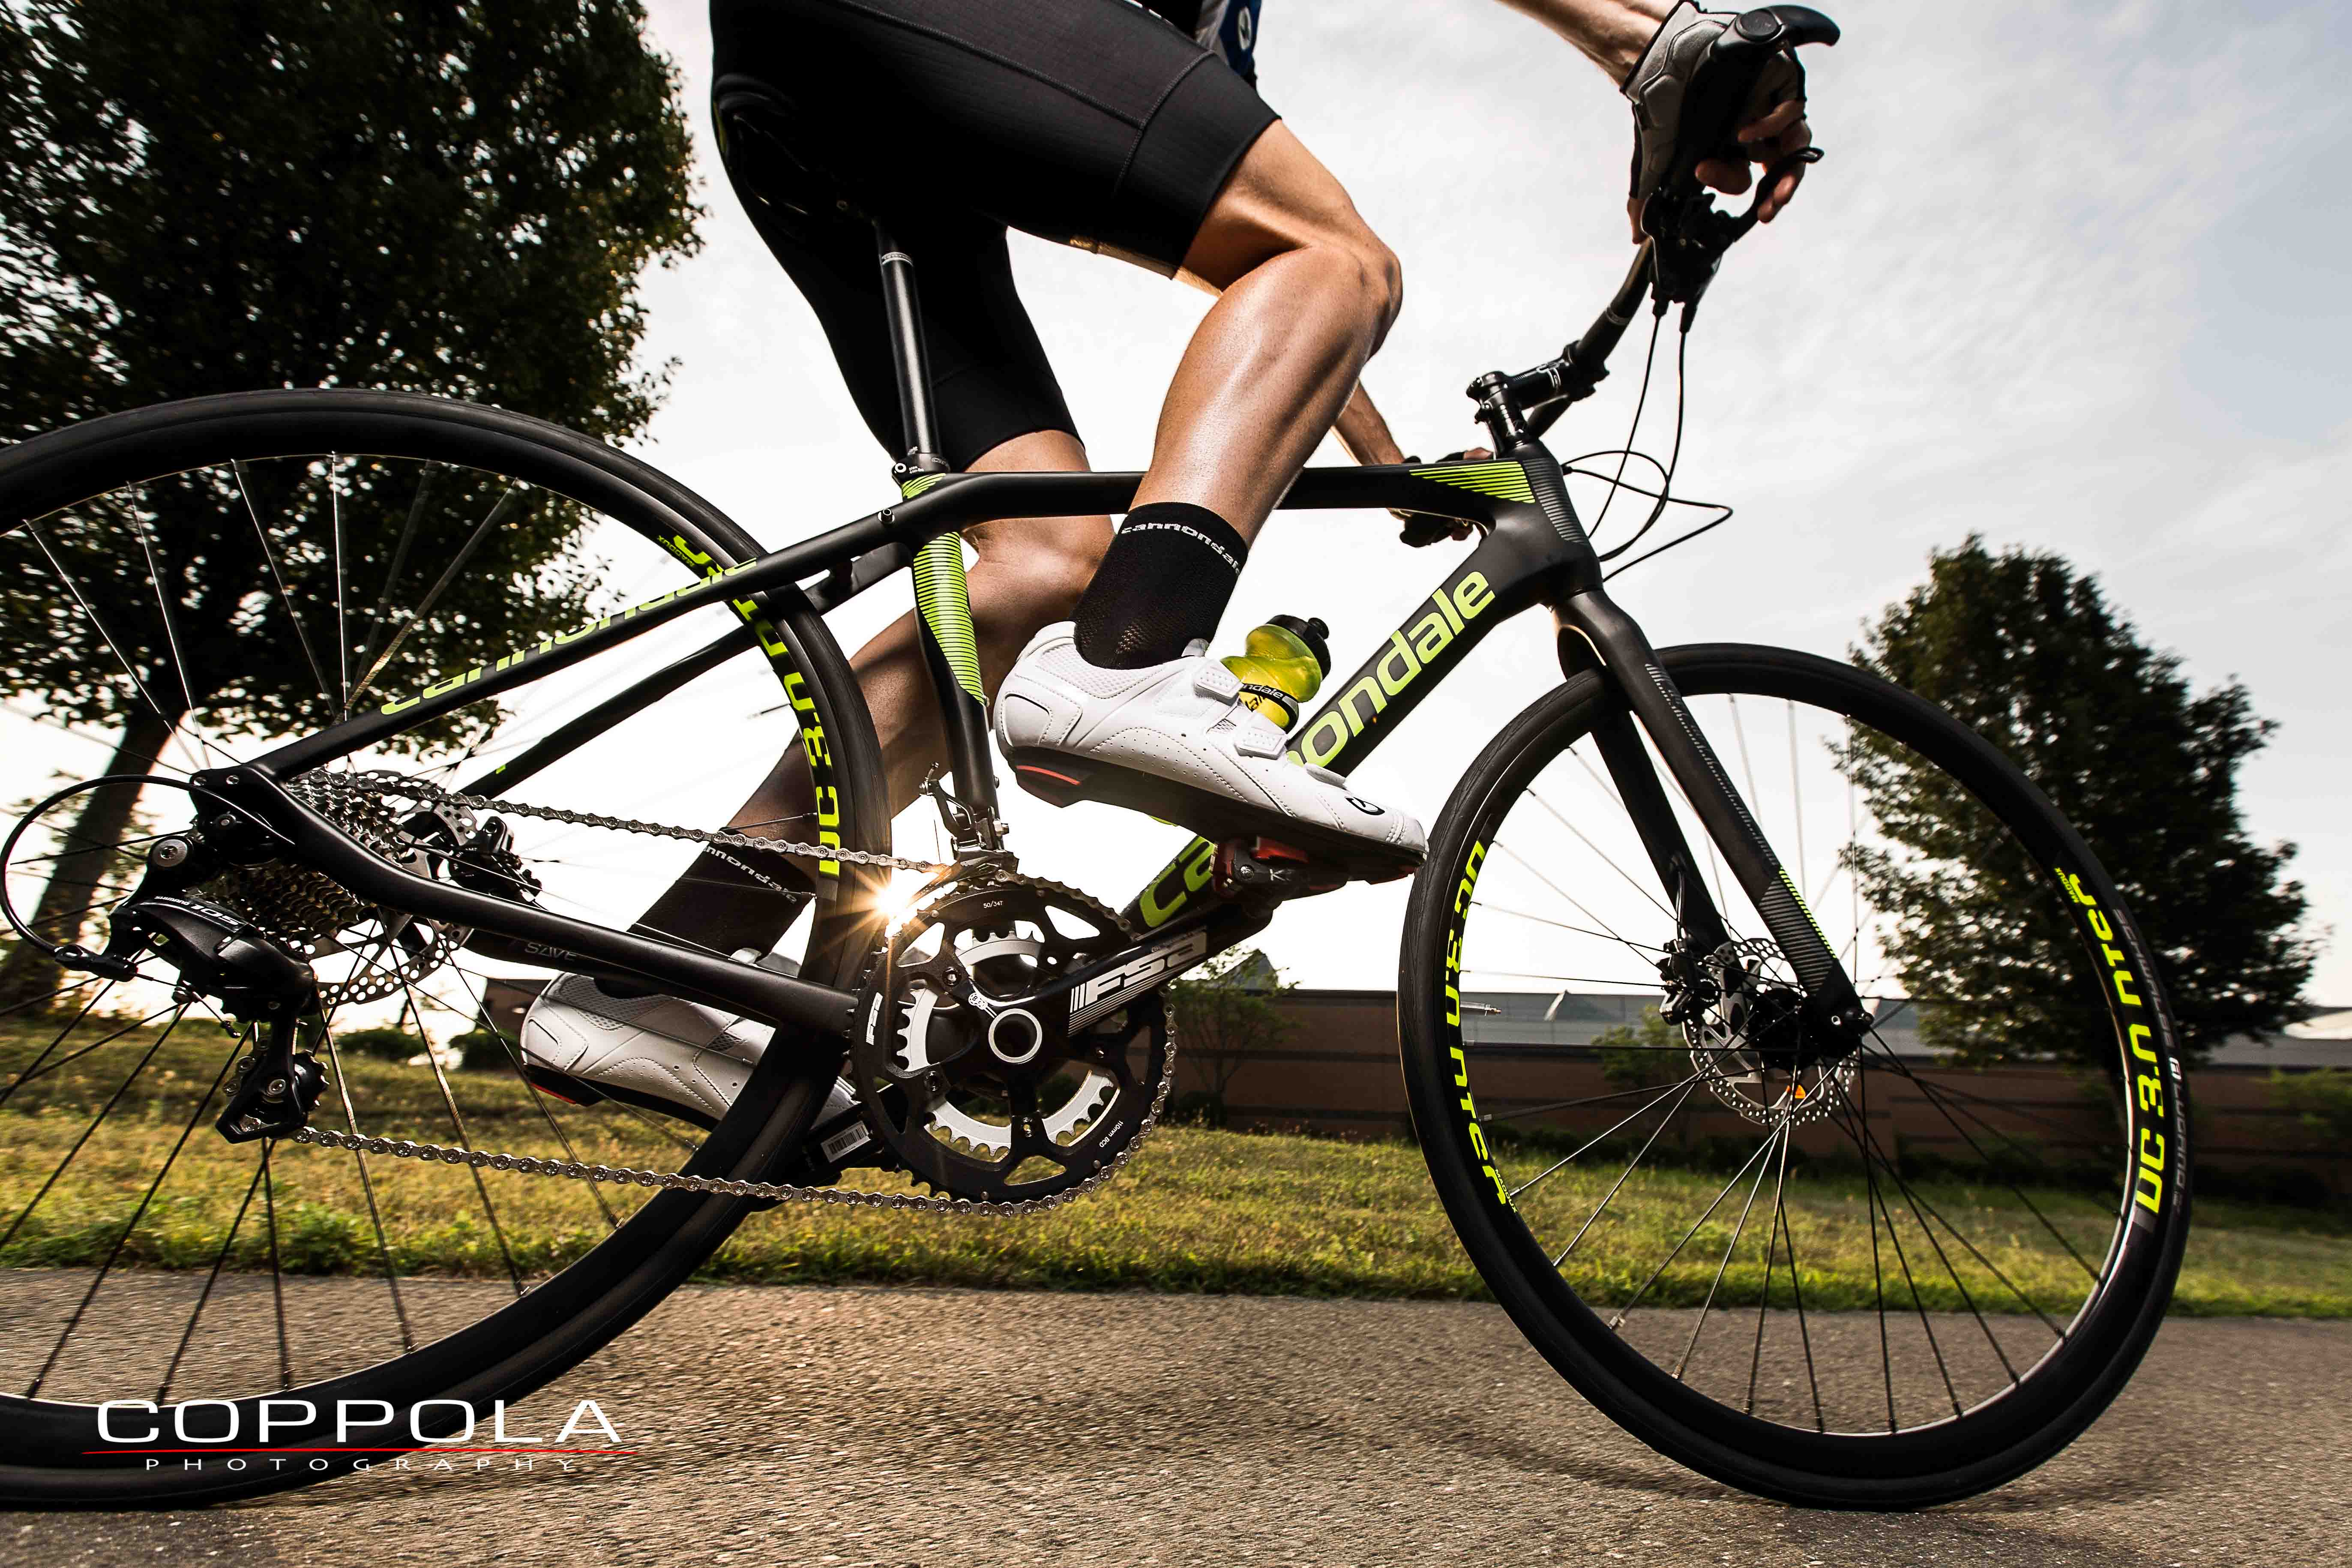 CT Commercial Photography: Urban & Fitness Bikes